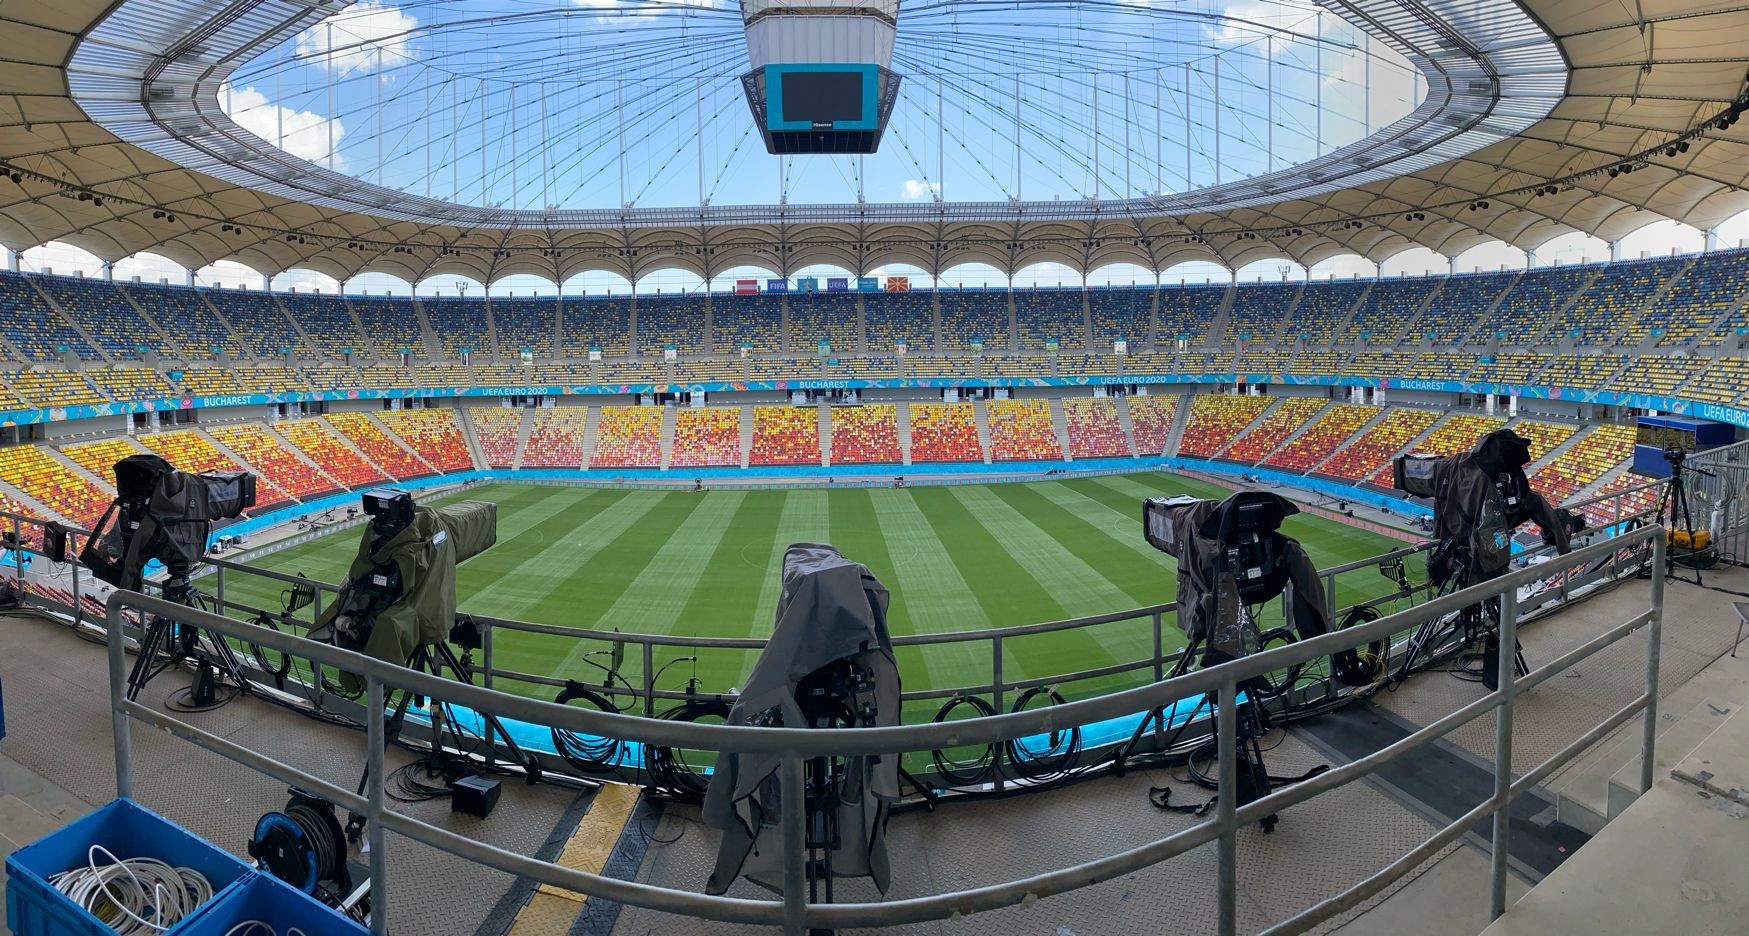 Euro Media Group gantry cameras at the ready for the opening Euro 2020 game in Bucharest